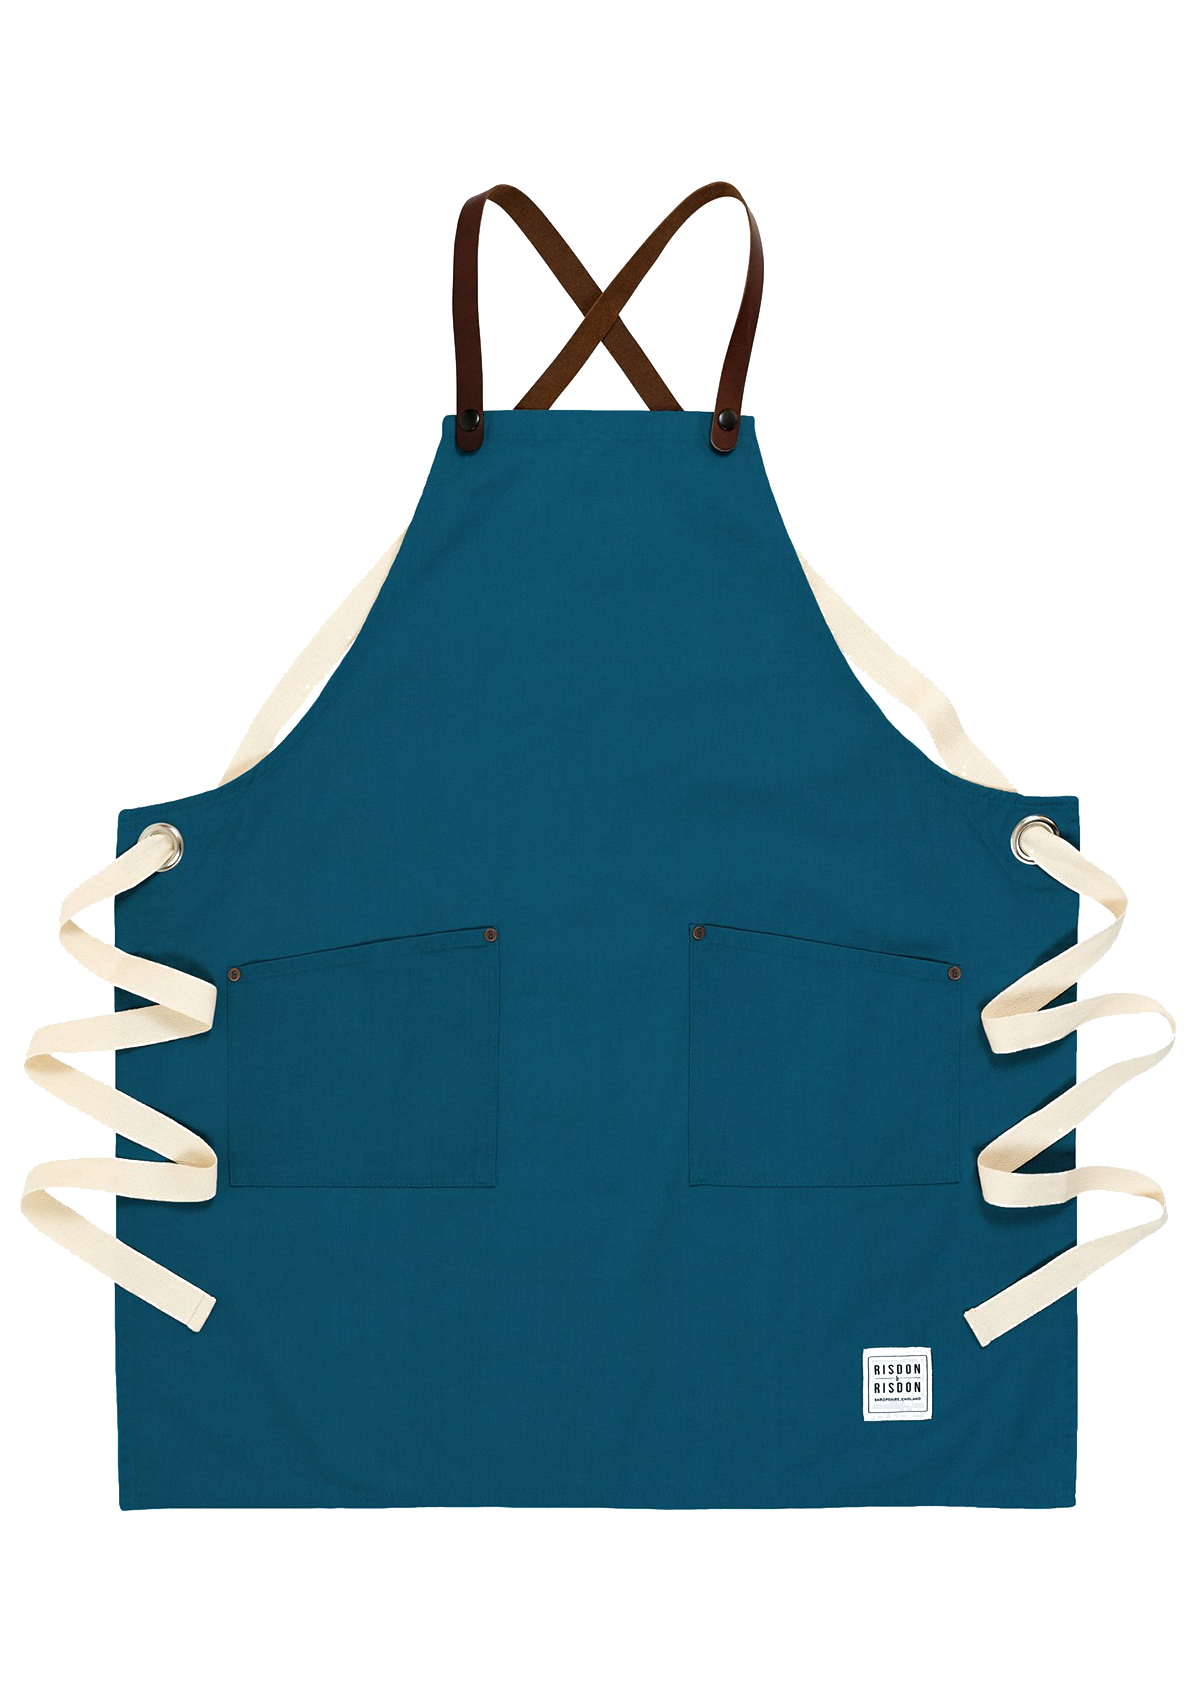 Handcrafted Apron Studio with Leather Straps